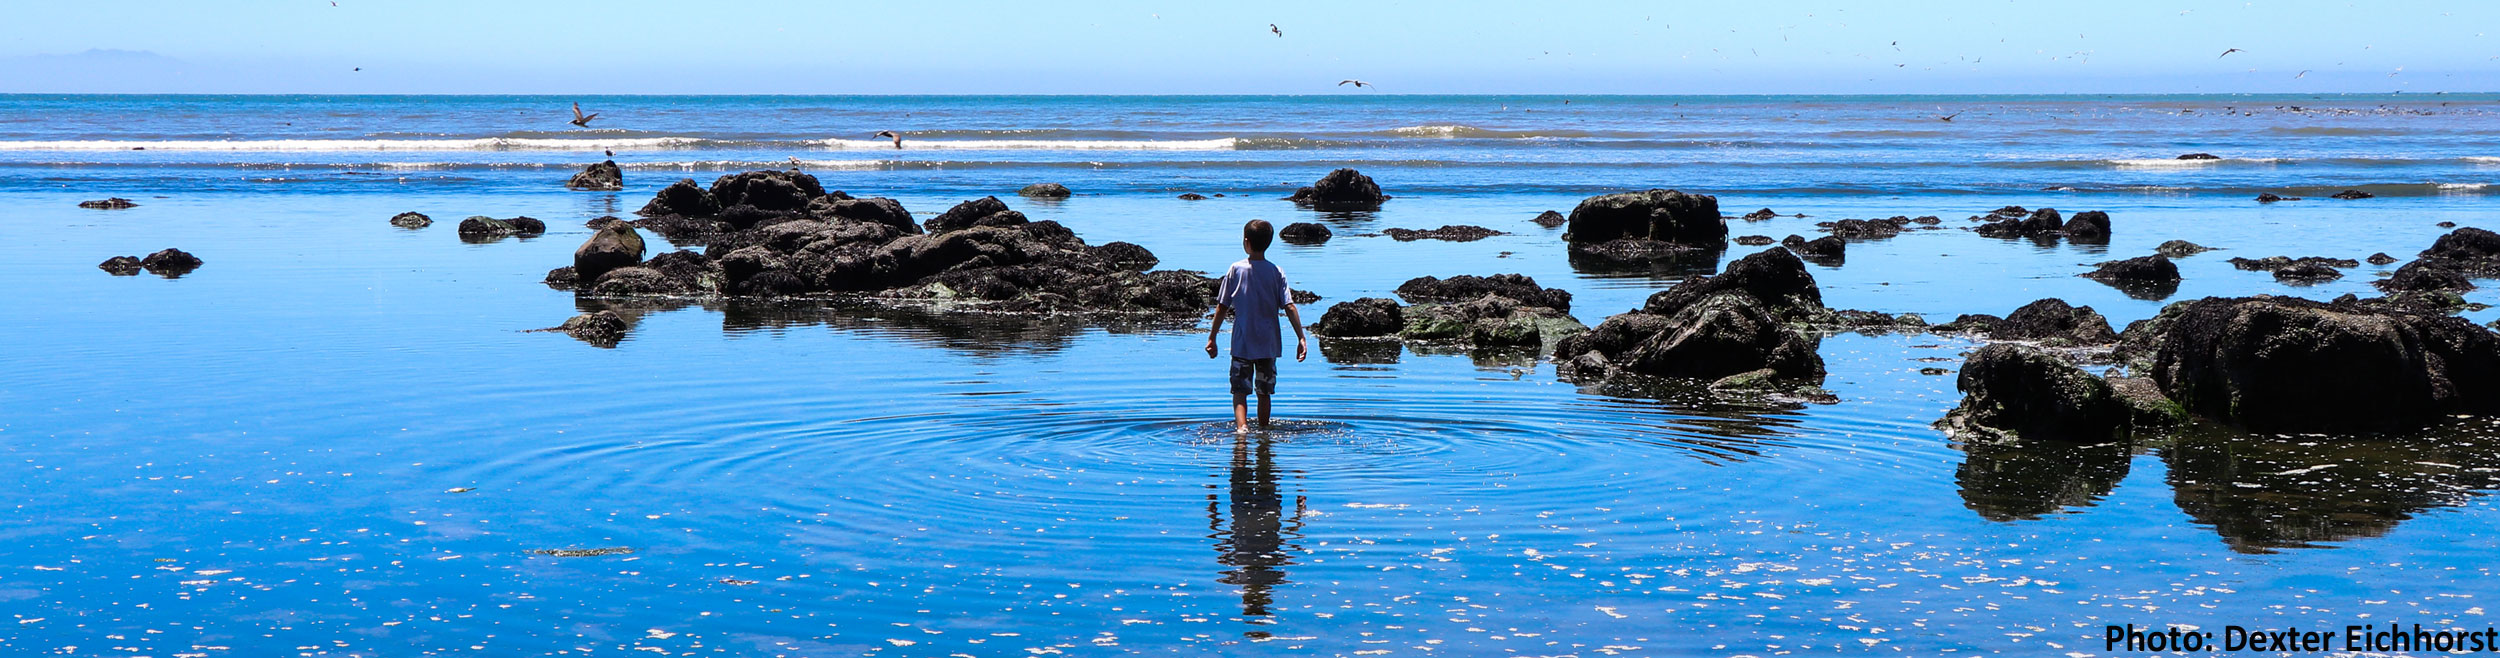 Child wading in the ocean, Photo by Dexter Eichhorst